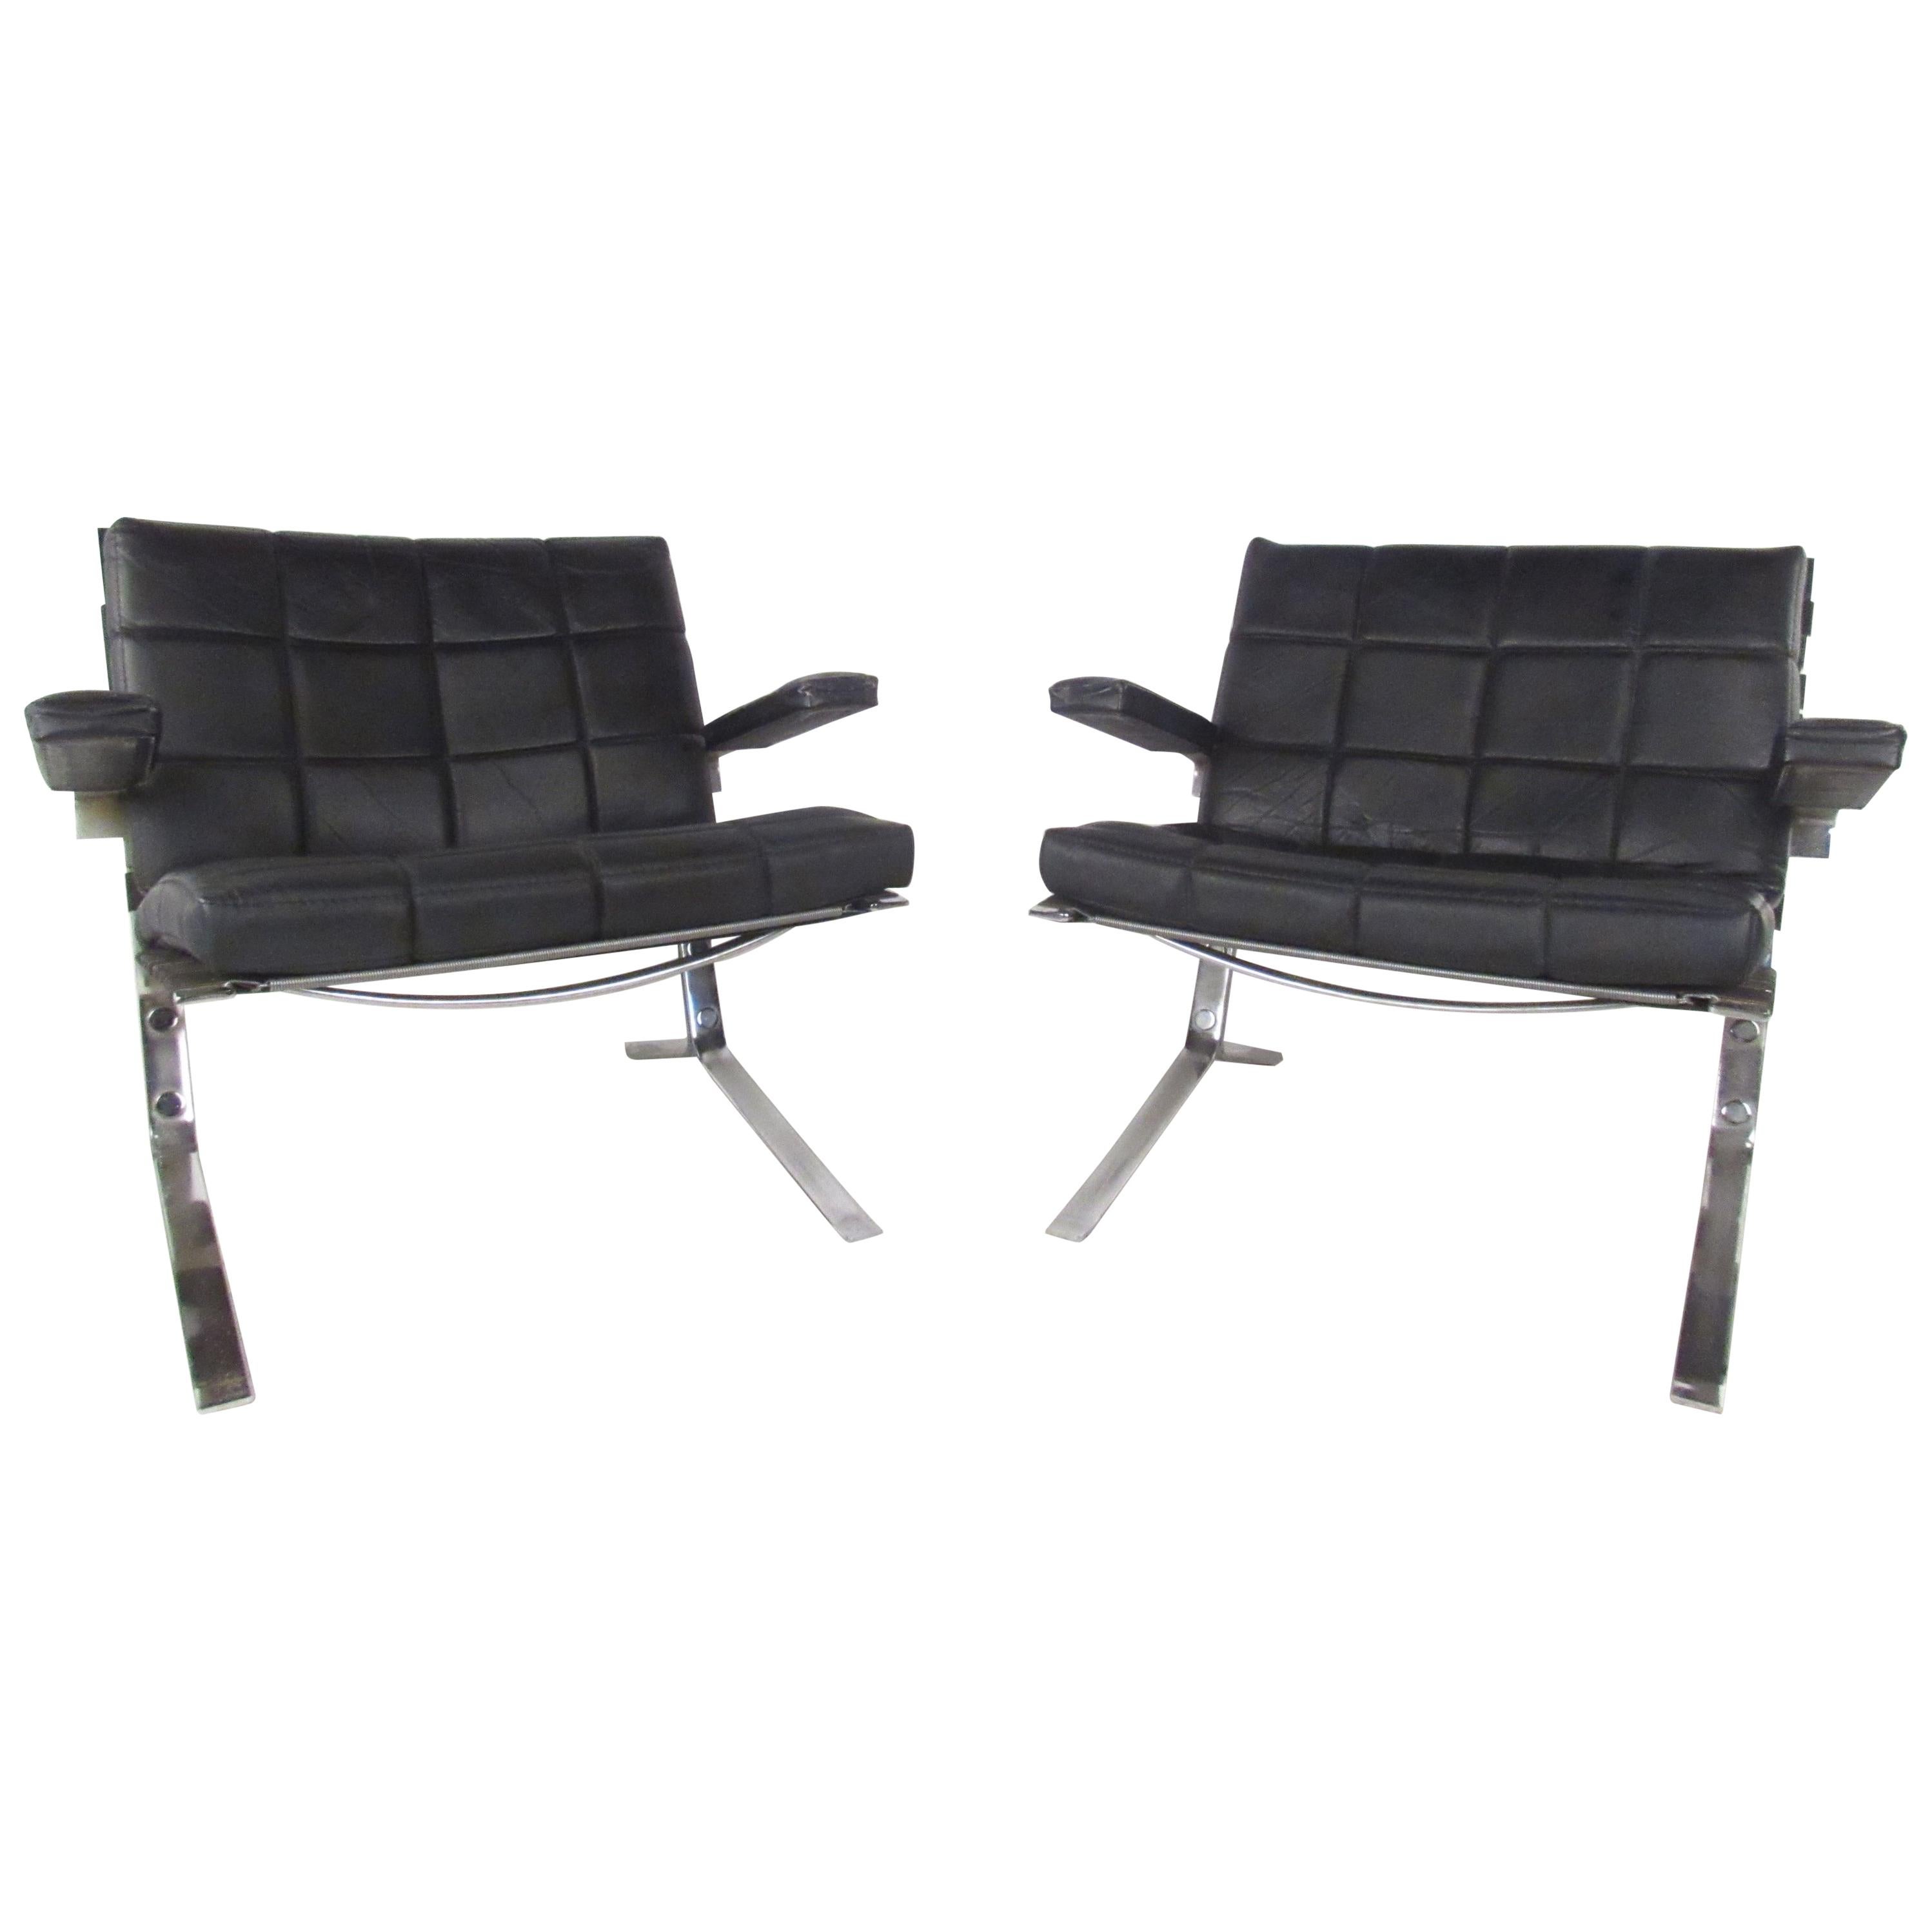 A sleek Danish cantilever design with a heavy chrome base and an overstuffed leather cushion. This unique vintage modern pair of lounge chairs boast thick padded arm rests ensuring maximum comfort in any seating arrangement. Please confirm item